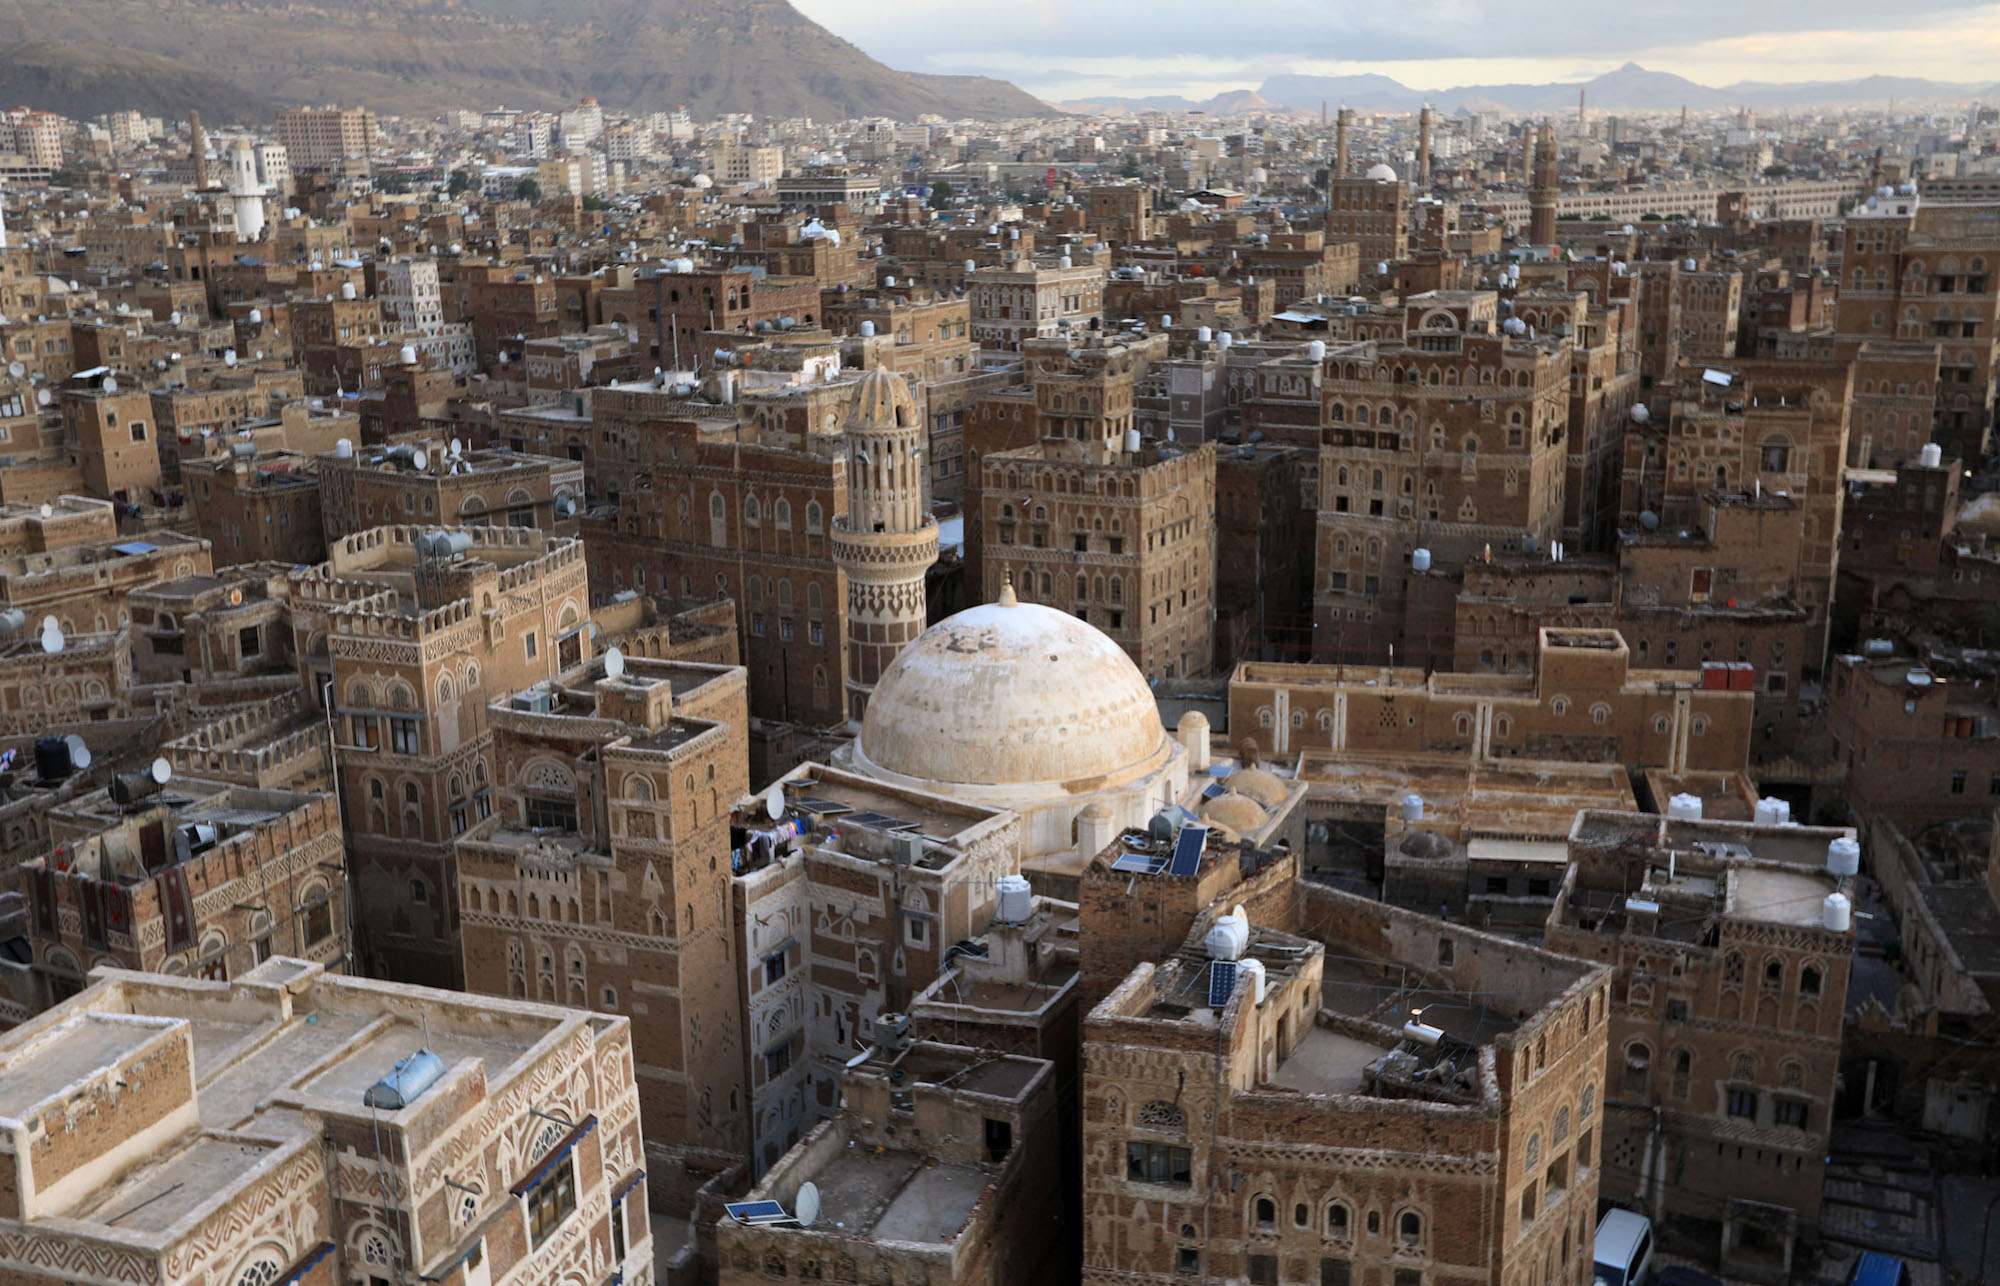 View of Sanaa's Old City, a UNSECO heritage site, and its mud houses